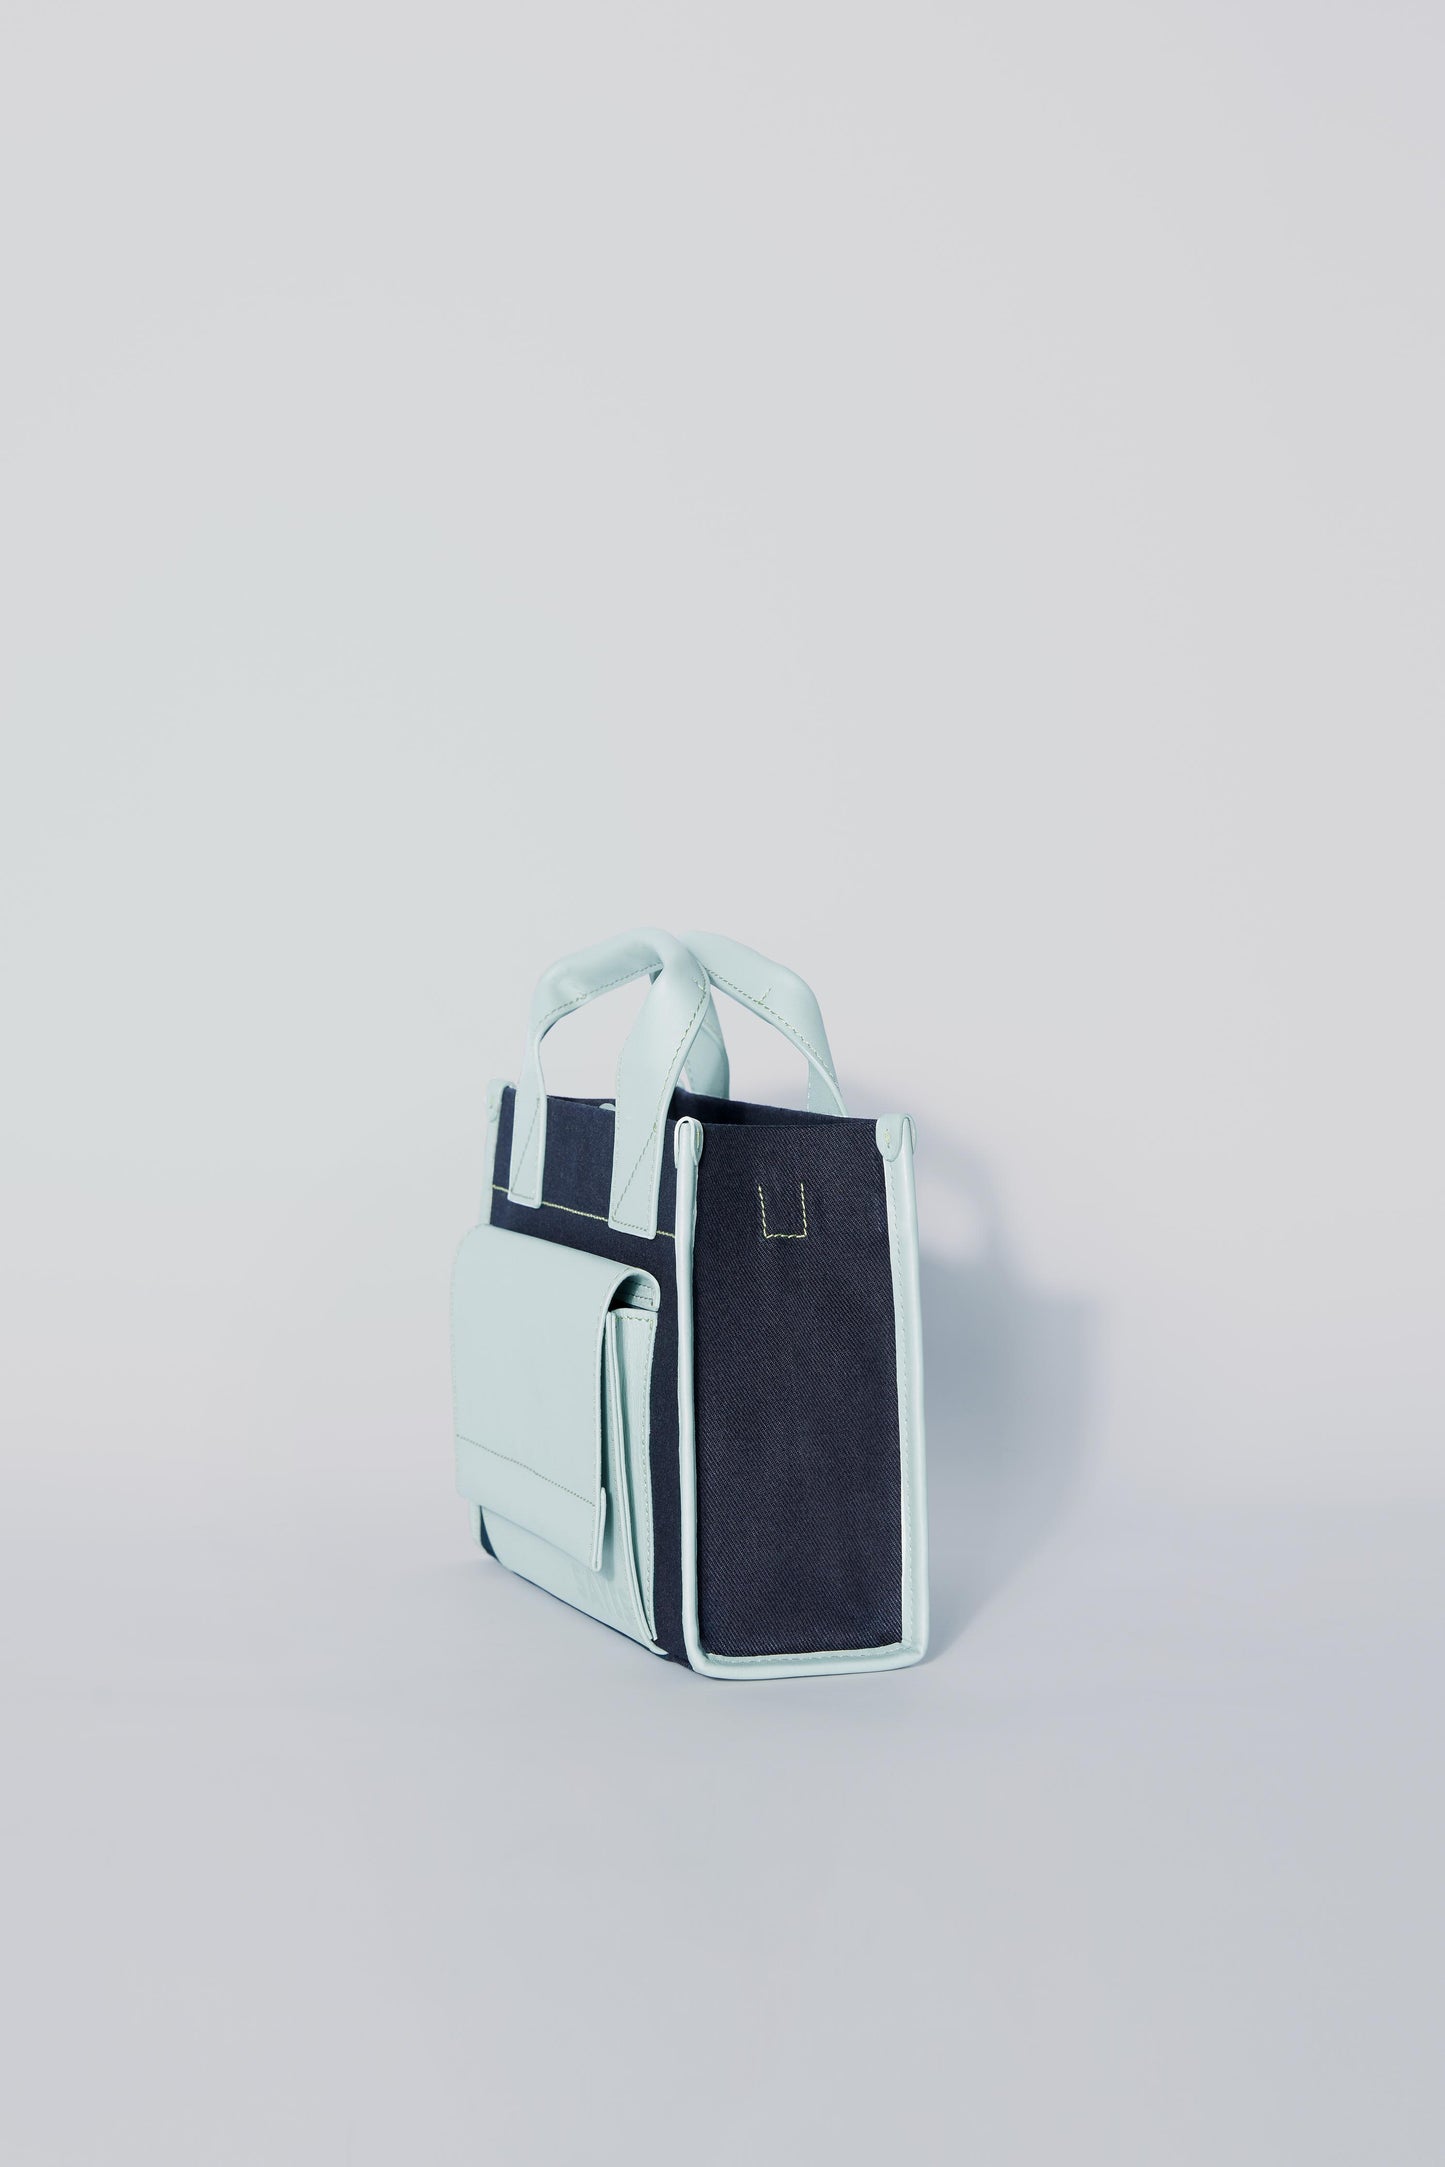 STITCHED POCKET MINI TOTE BAG IN NAVY AND SEA GREEN